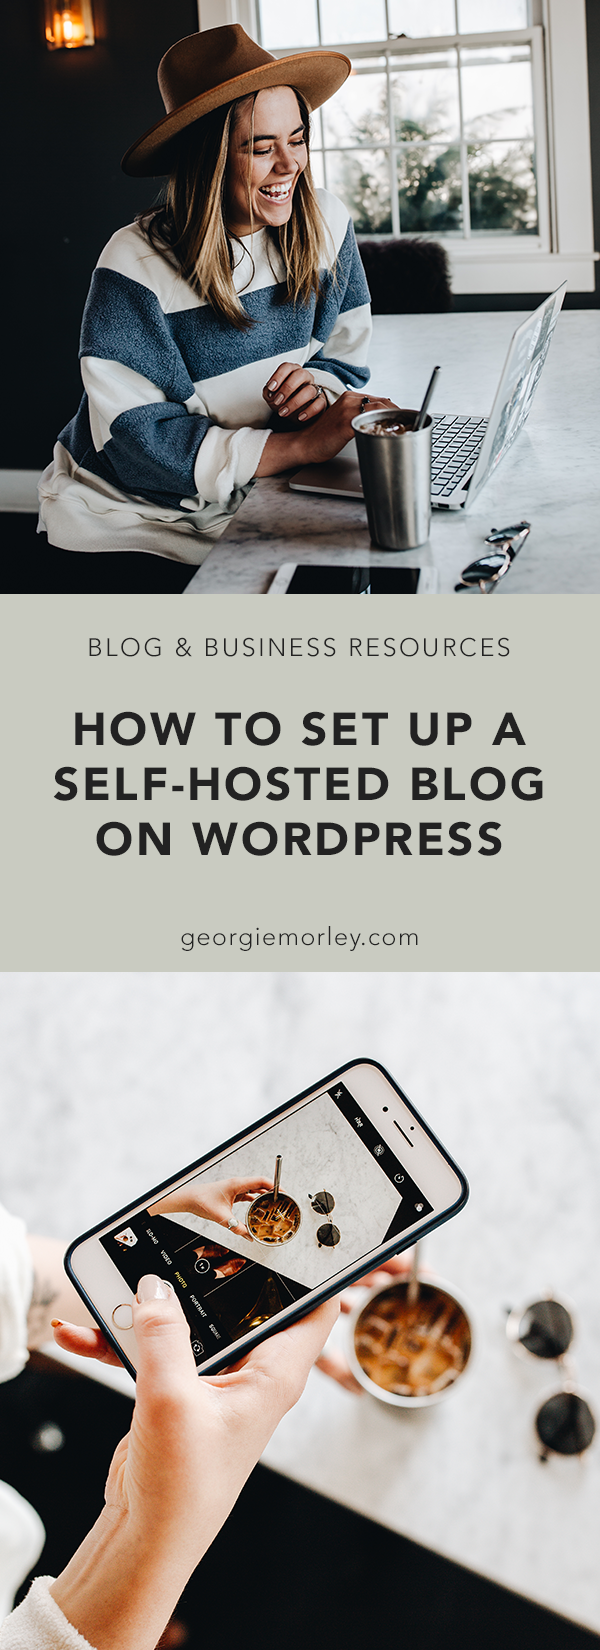 How to Set Up a Self-Hosted Blog on WordPress